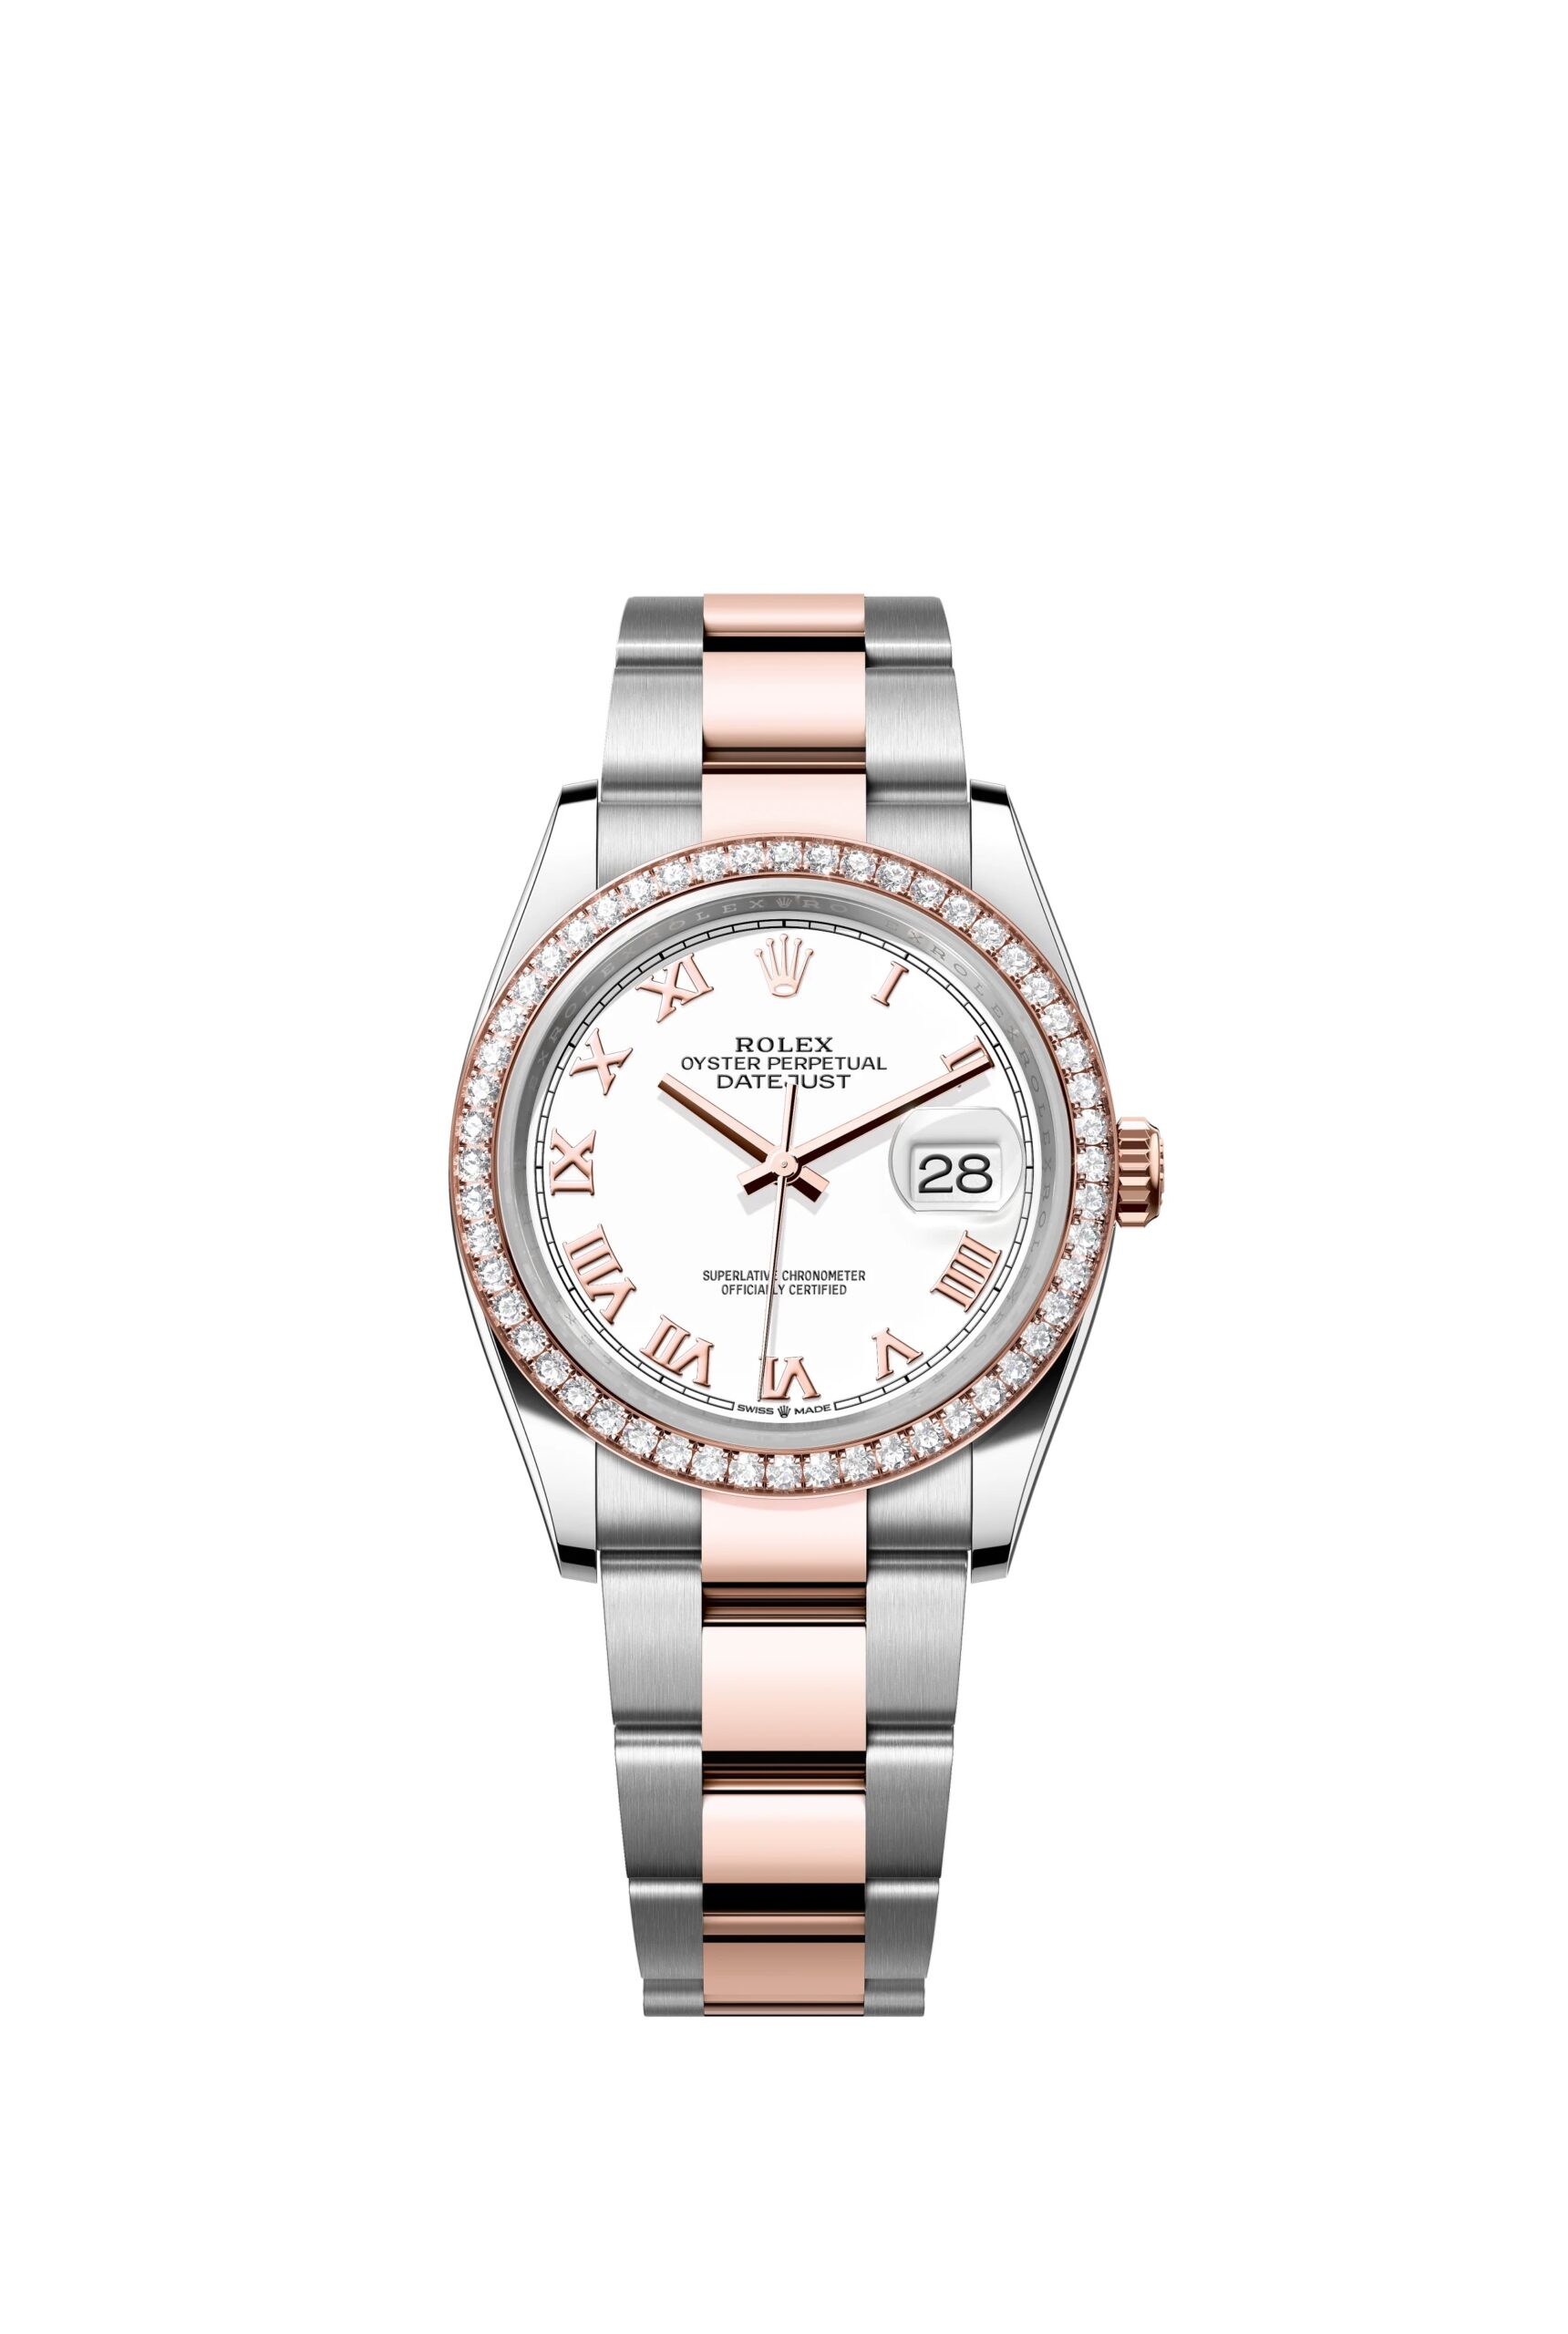 Rolex Datejust 36 Oyster, 36 mm, Oystersteel, Everose gold and diamonds Reference 126281RBR